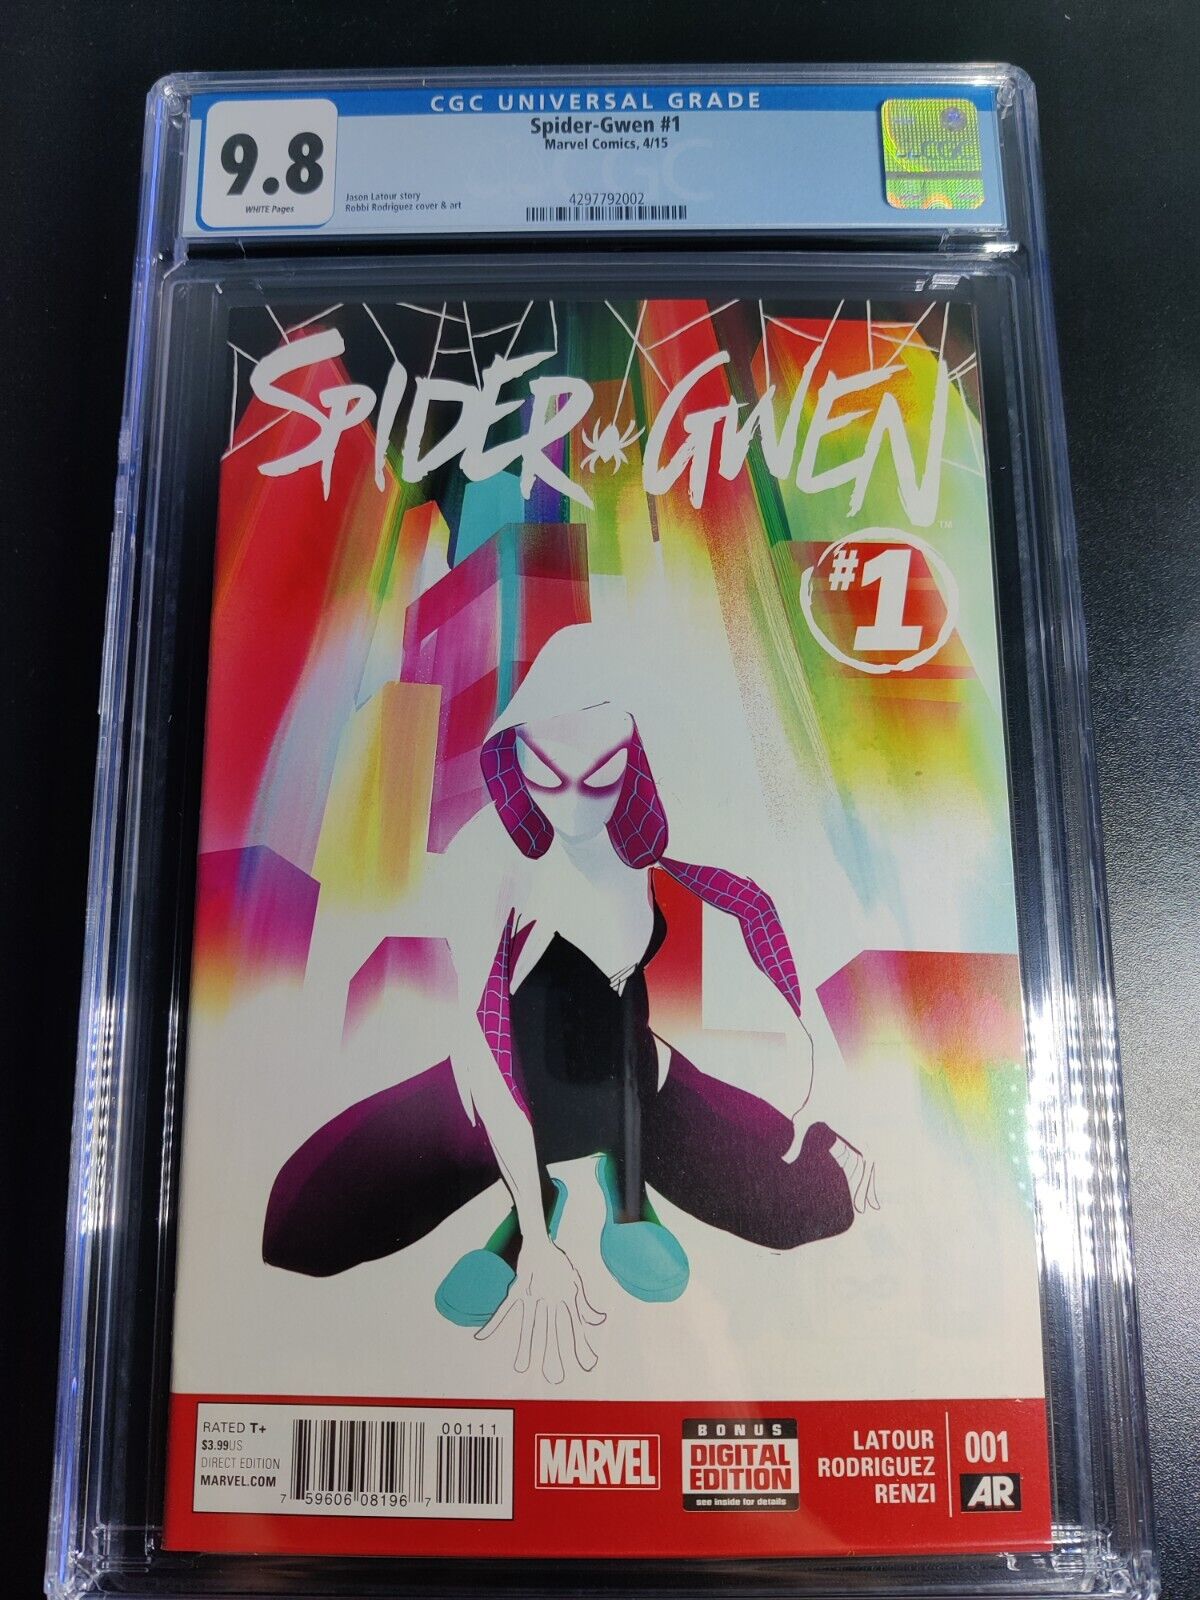 Spider-Gwen (Marvel Comics, 2015) #1 1st Printing Cover A CGC 9.8 WP NM/M